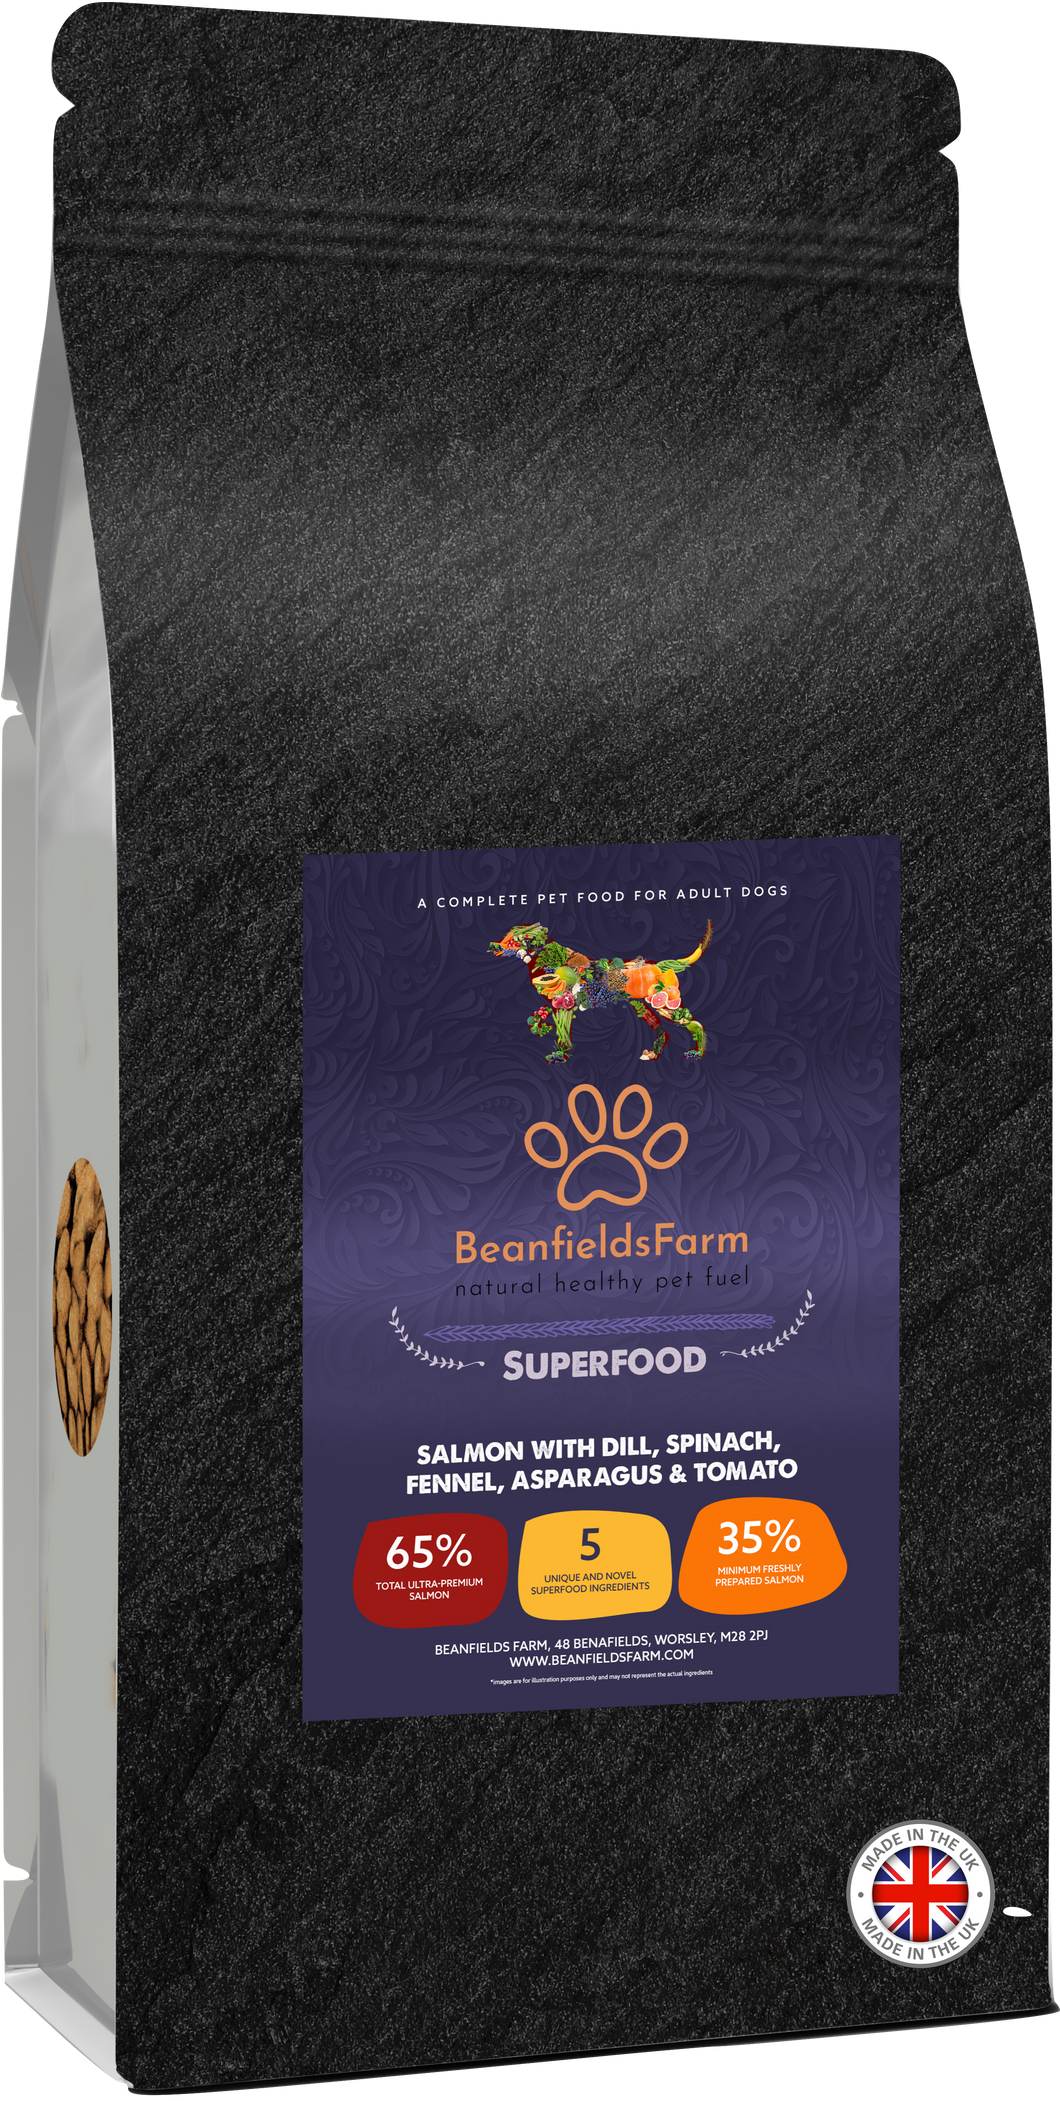 Superfood Premium Dog Food for Active Adult Dogs Veterinary Approved